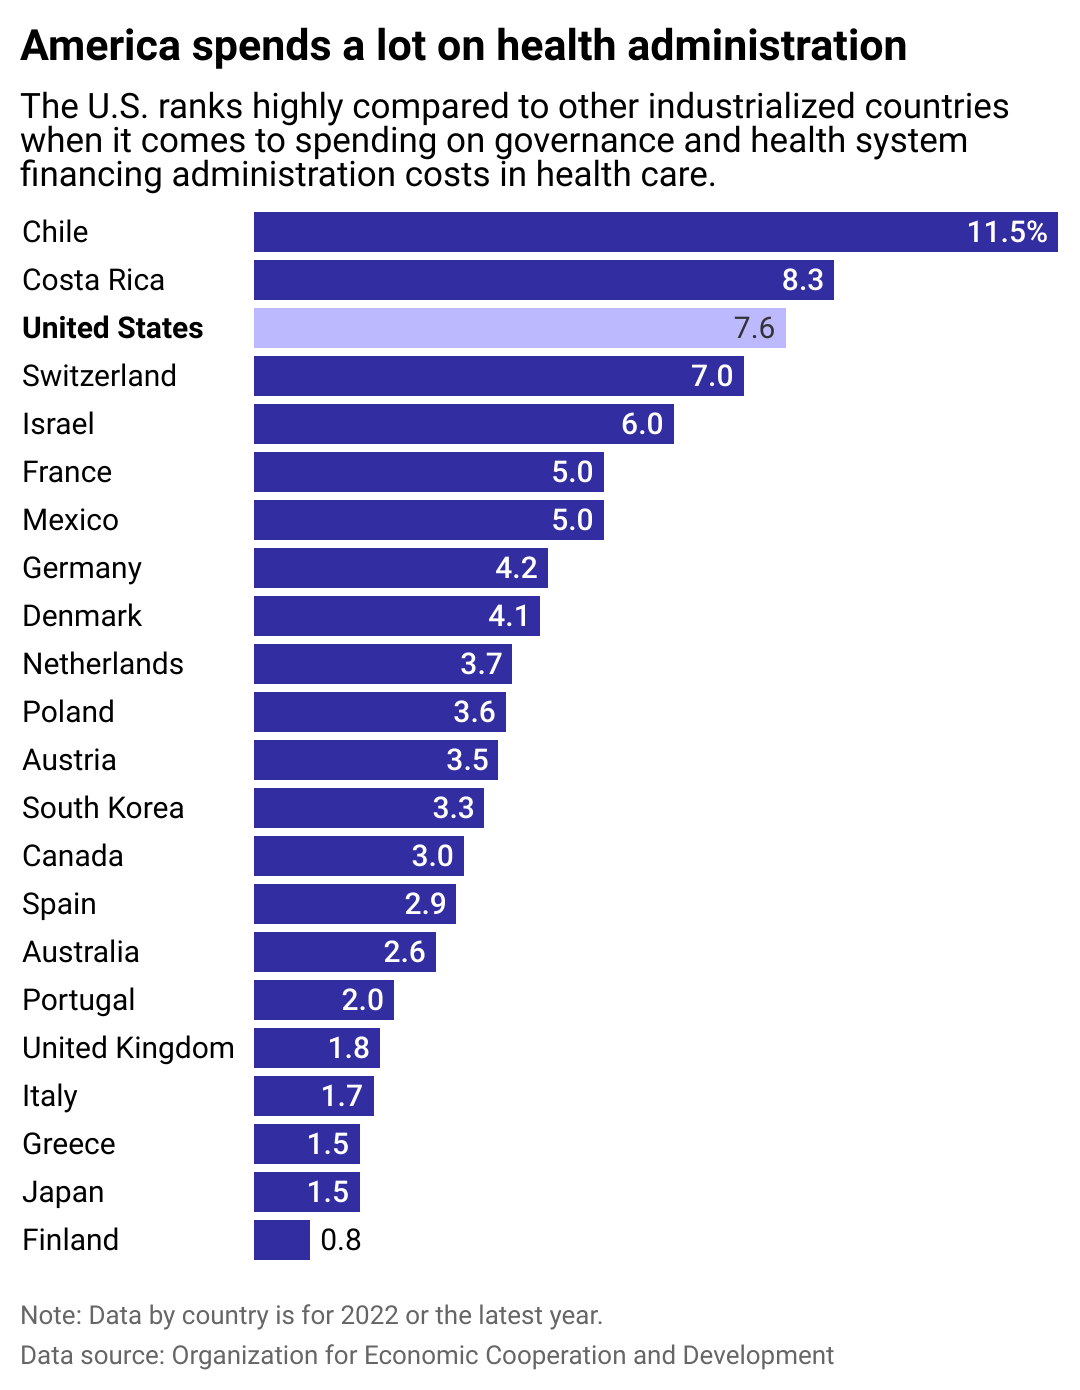 Bar chart showing U.S. ranks third when it comes to spending on health system financing administration costs.